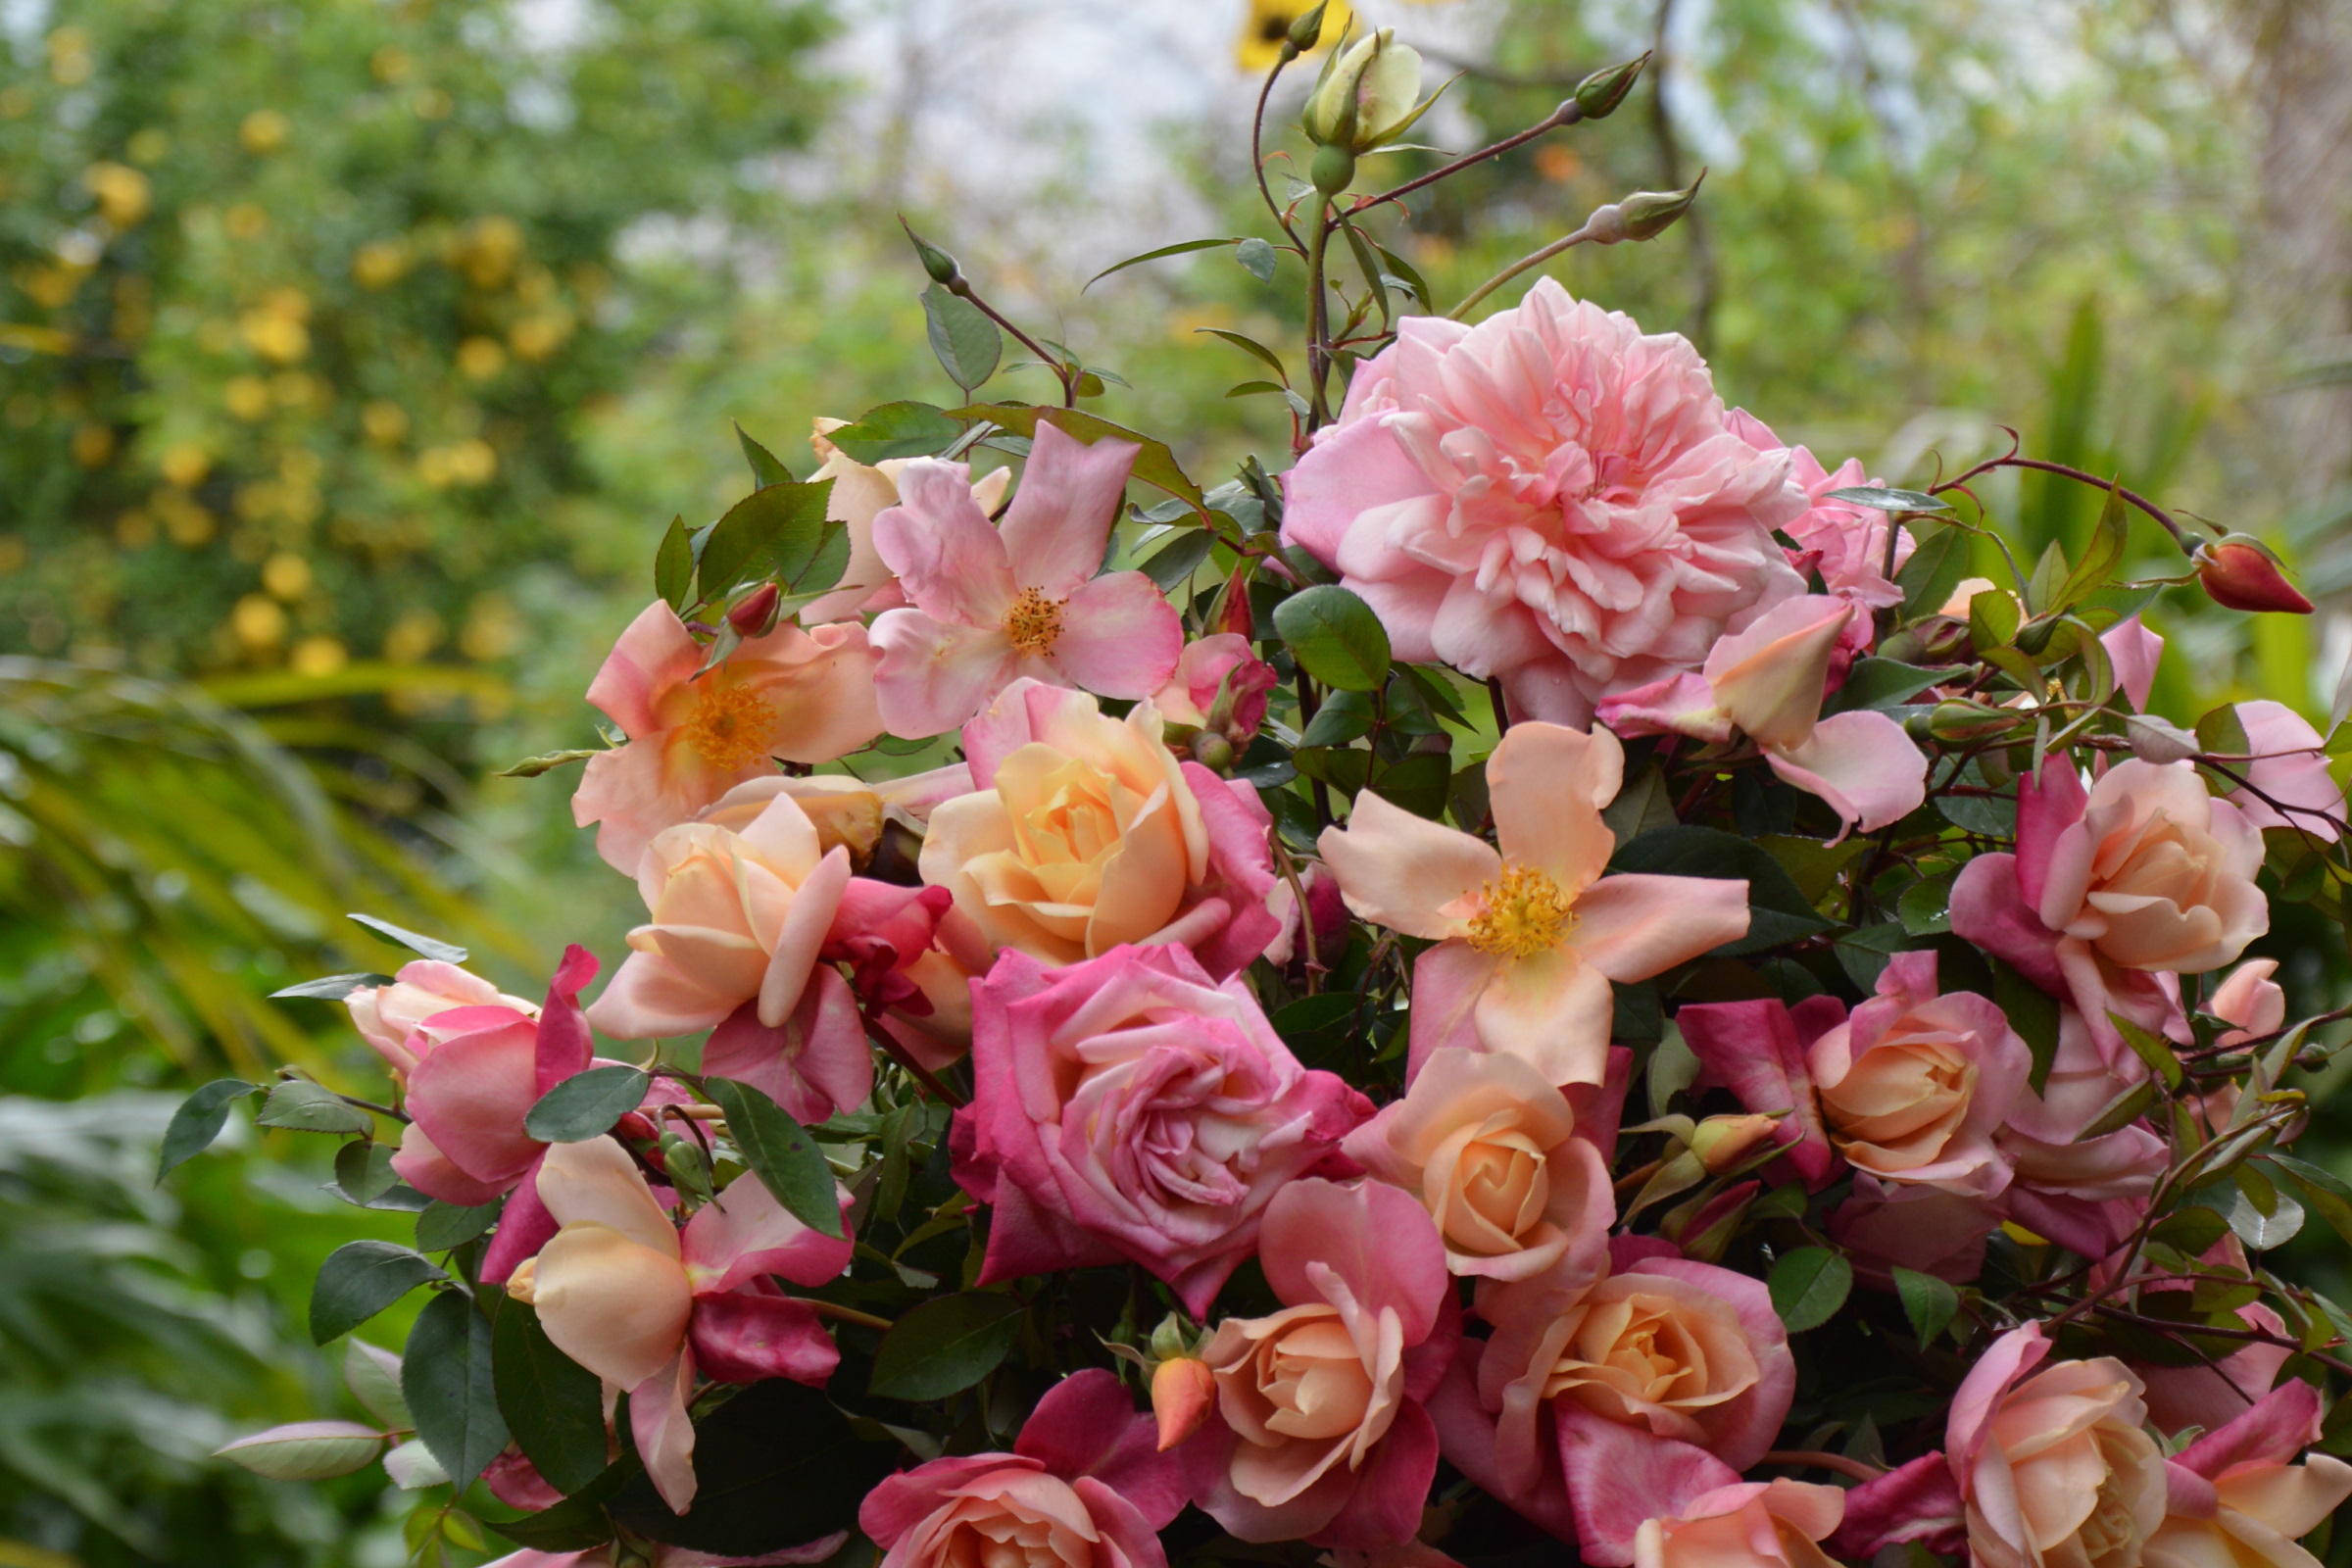 Heritage Roses - Bouquet mainly 'Mutabilis' and 'Rosette Delizy'